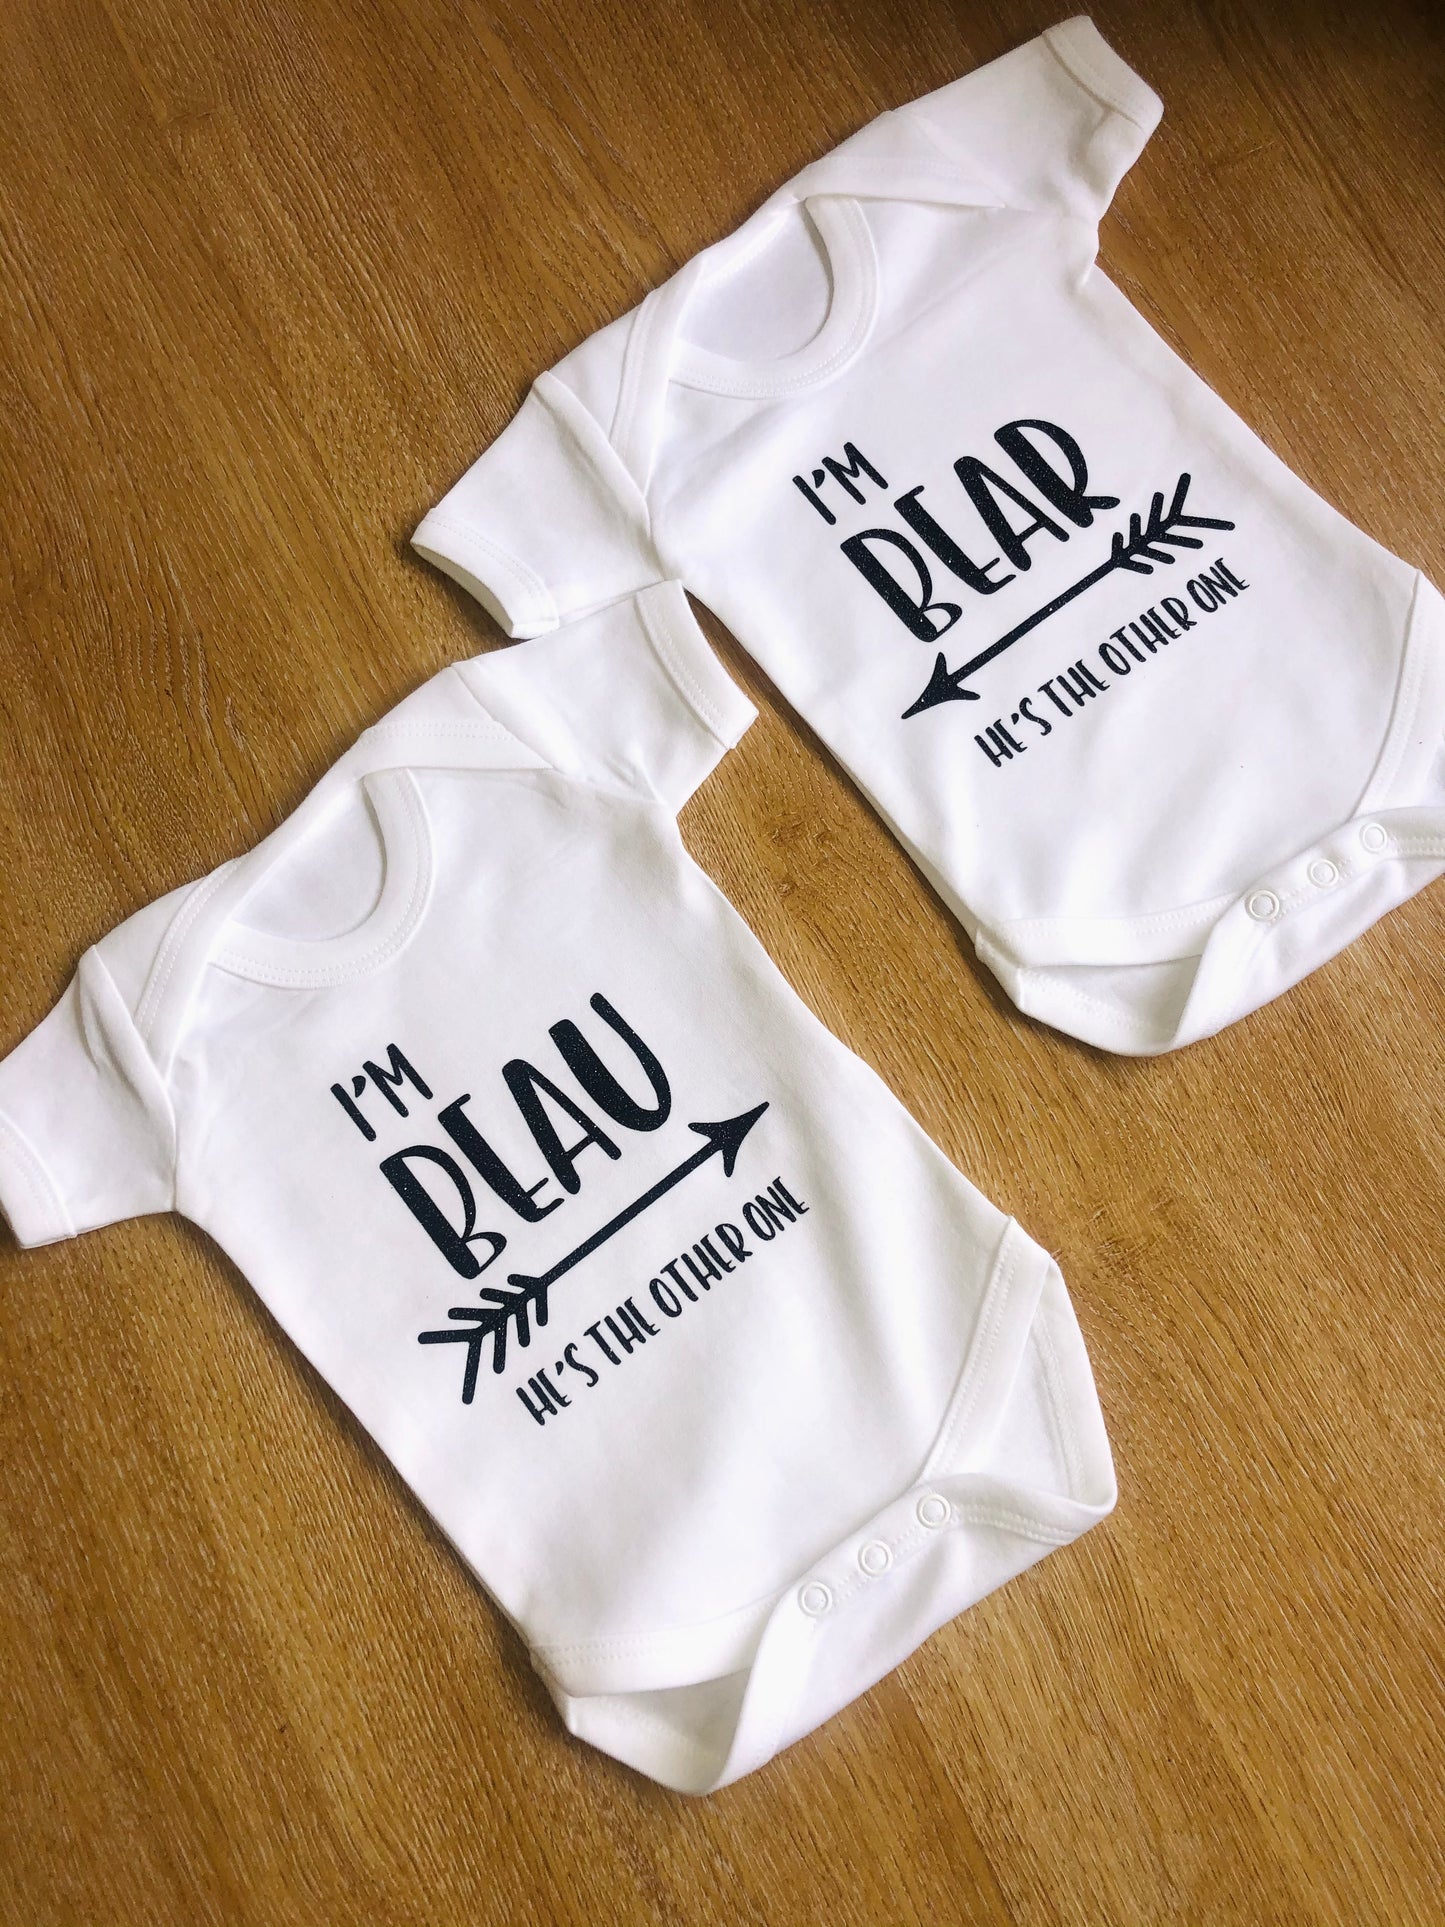 Twin Bodysuits - “he’s the other one”